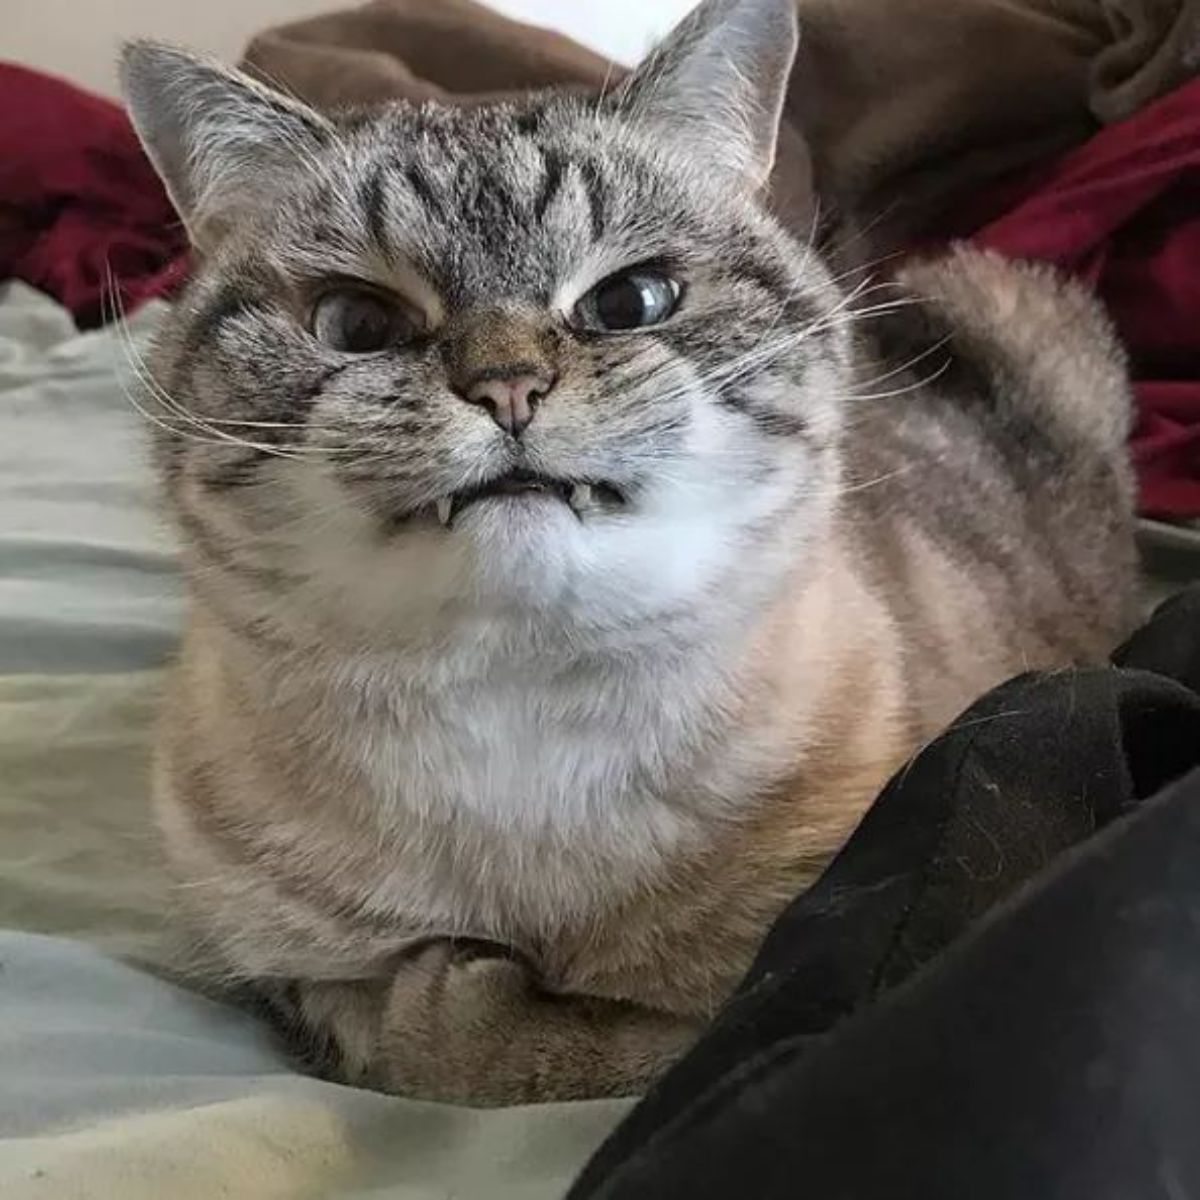 grey and white tabby cat sitting like a loaf on a bed and snarling at the camera with the teeth showing like fangs